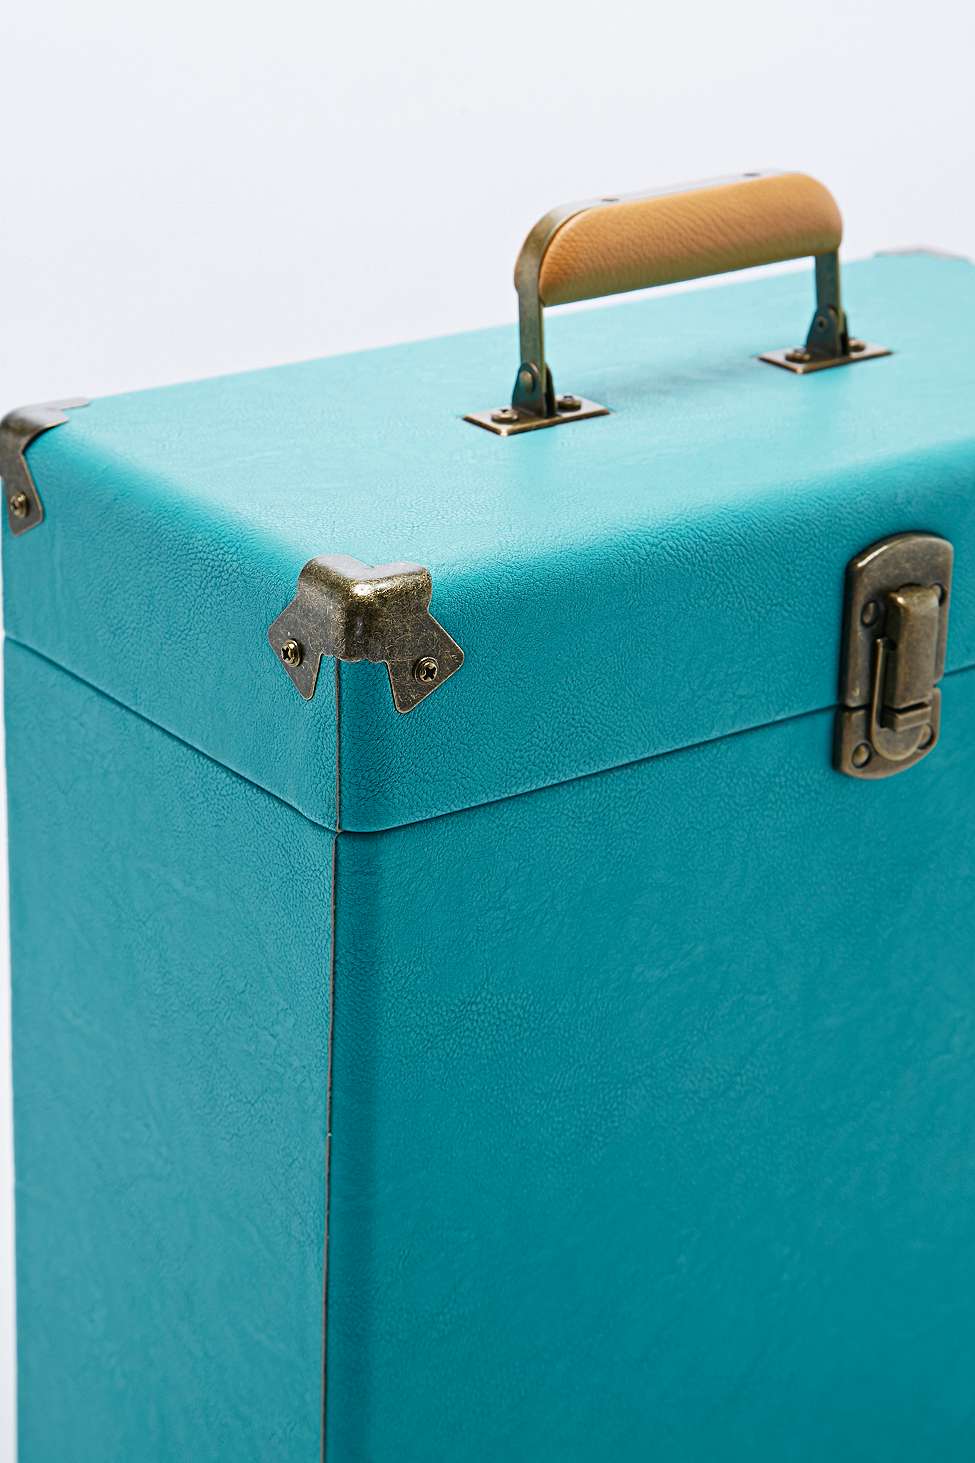 Crosley 12” Record Carrier Case in Dark Turquoise